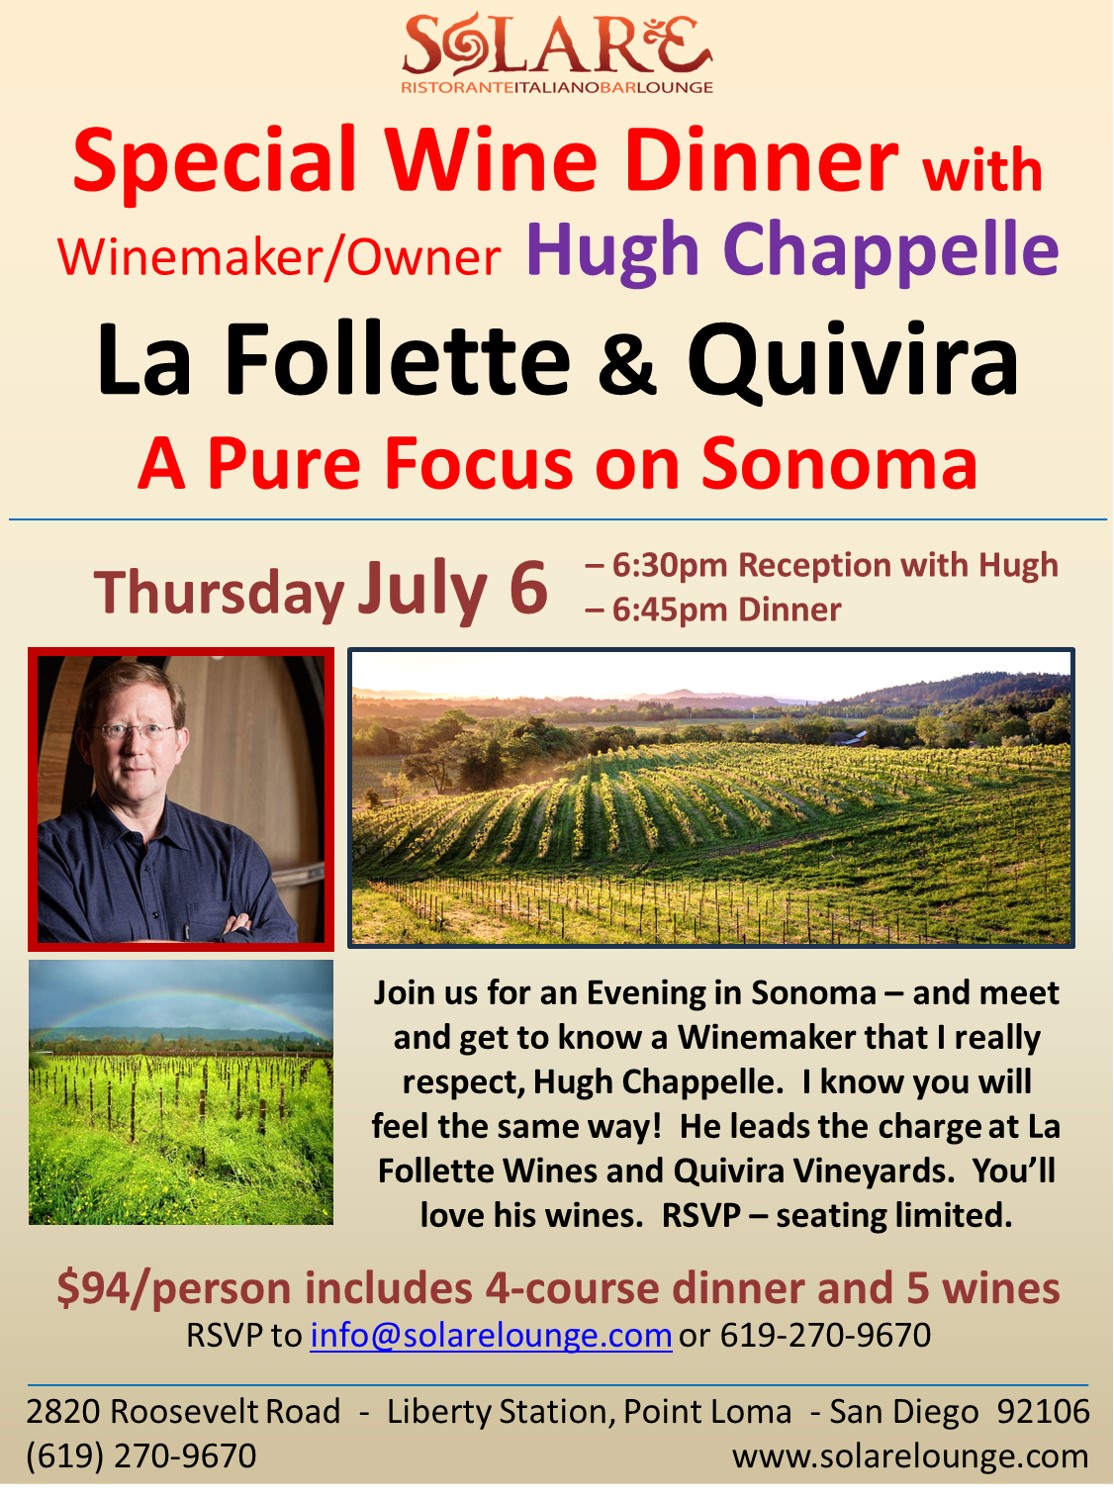 <a id="Solare-Hugh-Chappelle-Wine-Dinner"></a>Wine Dinner - A Sonoma Evening with Hugh Chappelle